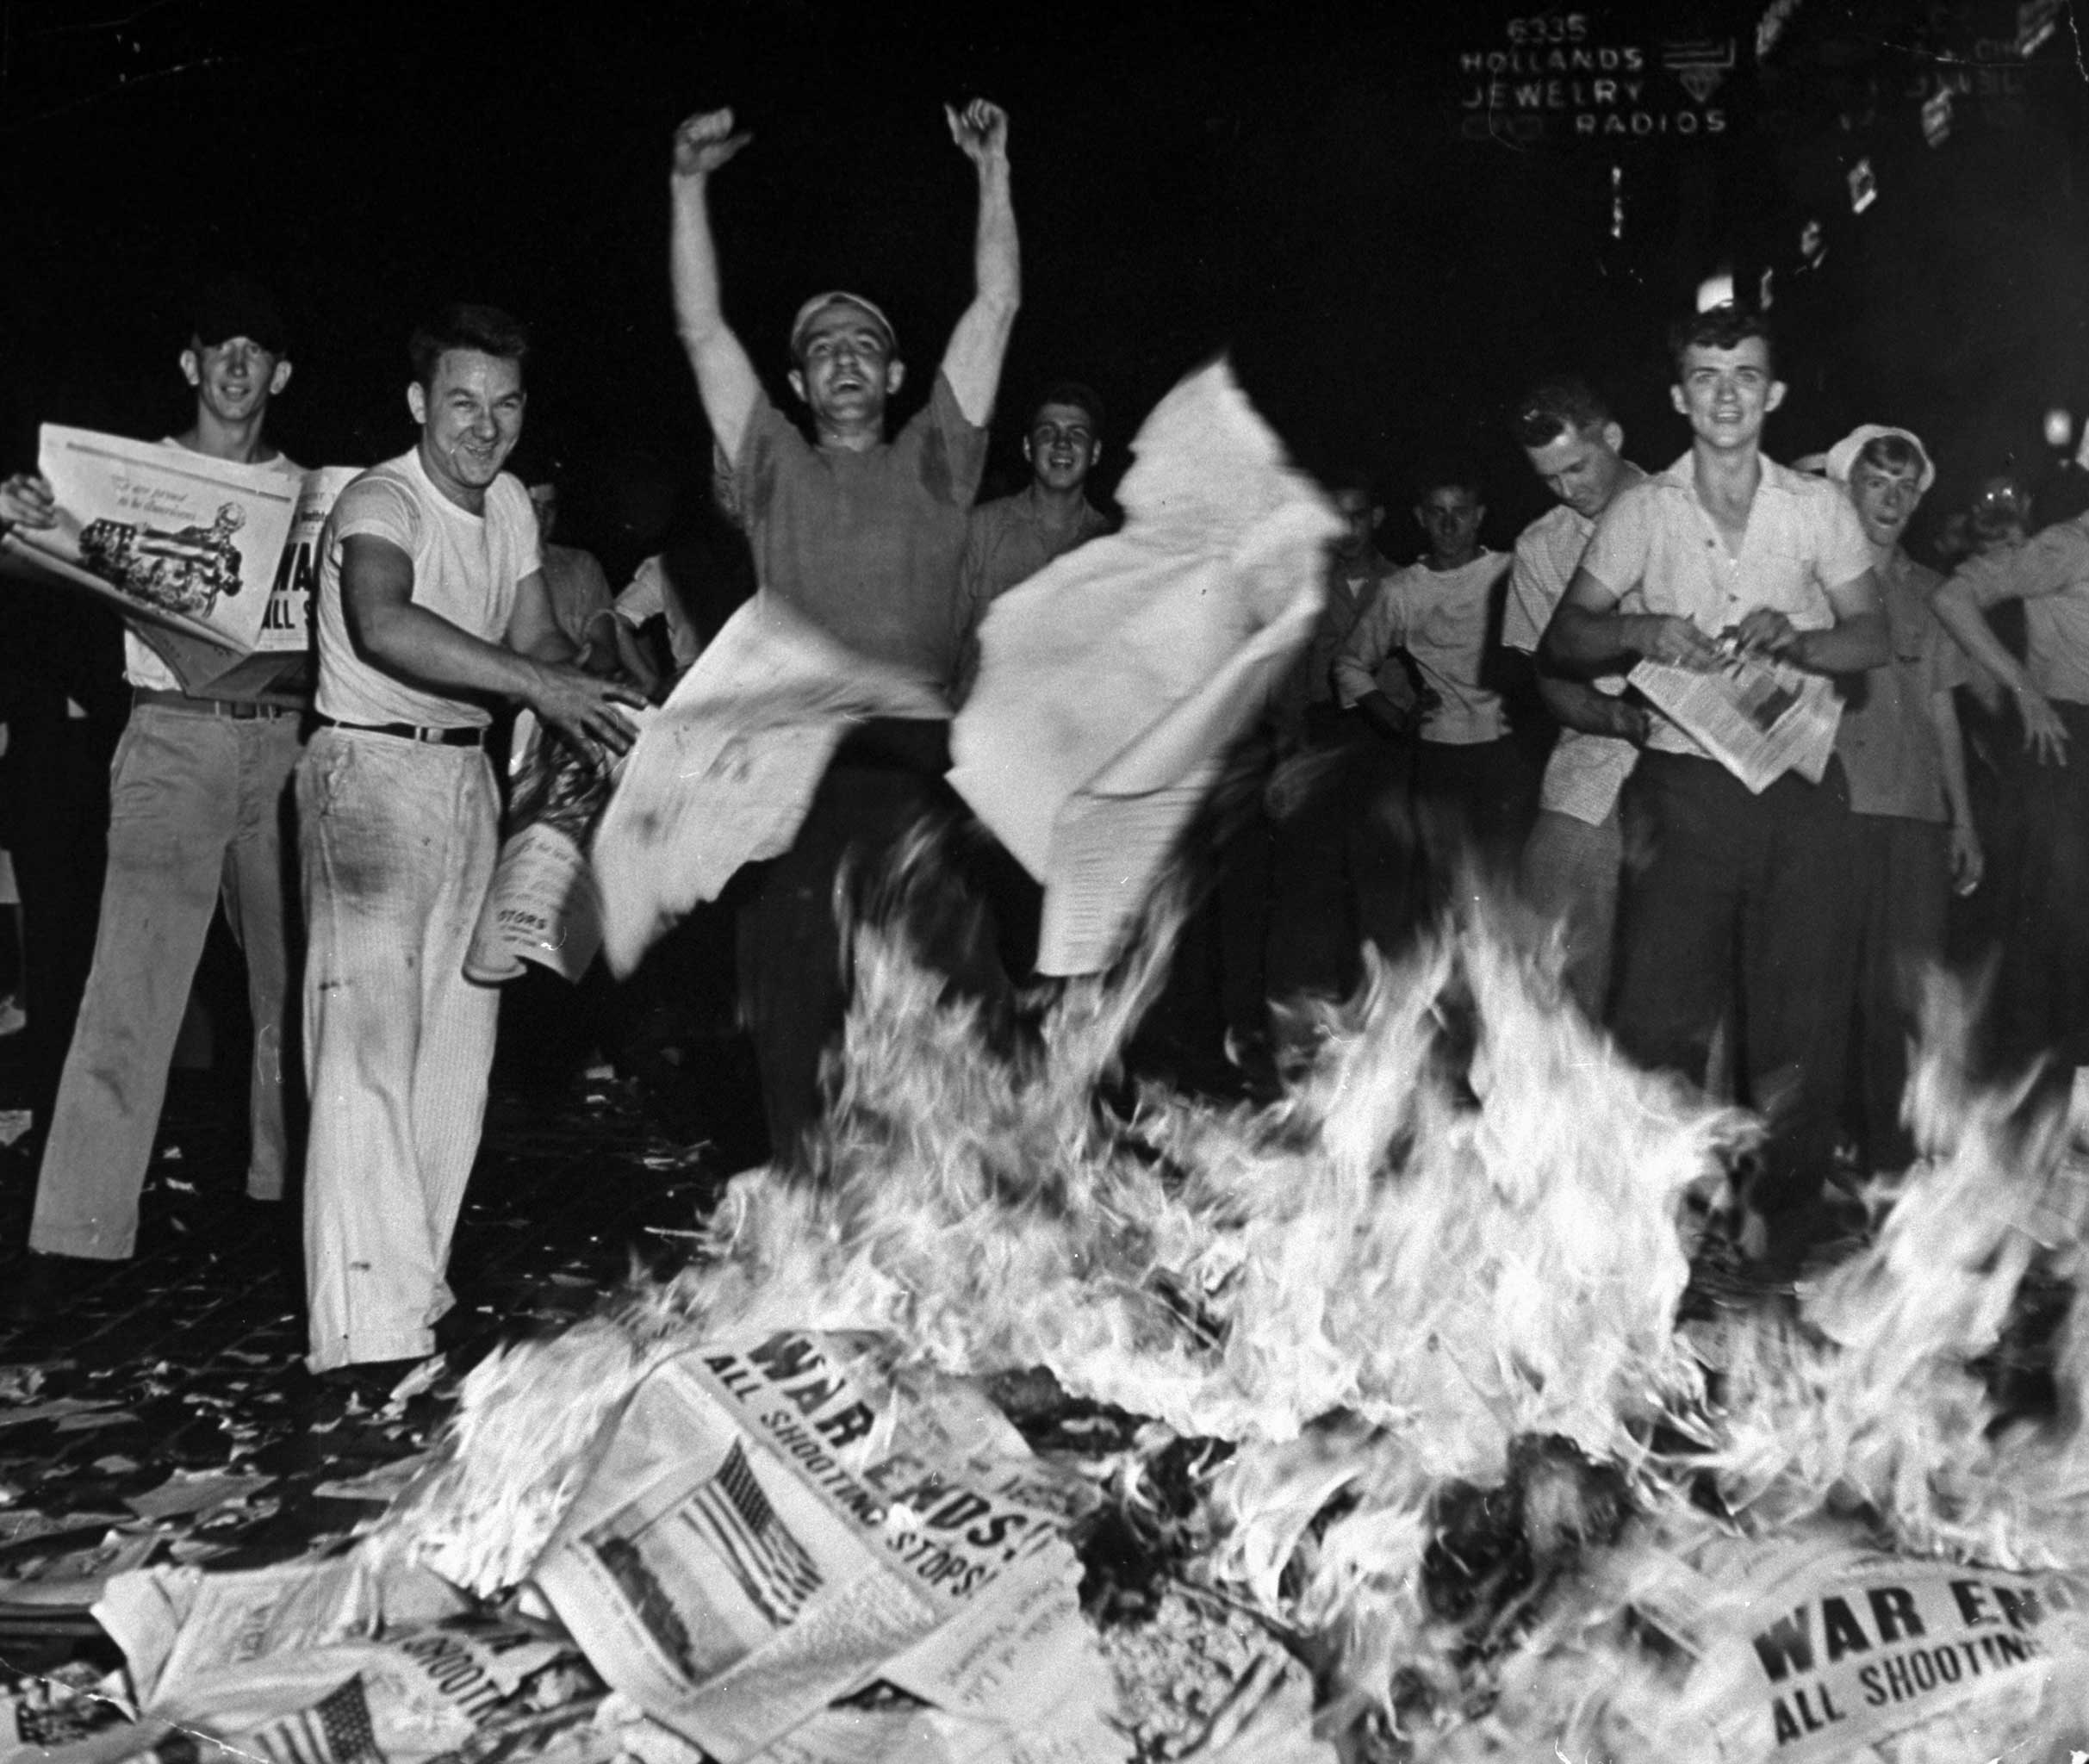 Not published in LIFE. Celebrations in Chicago, August 14, 1945 - V-J Day.